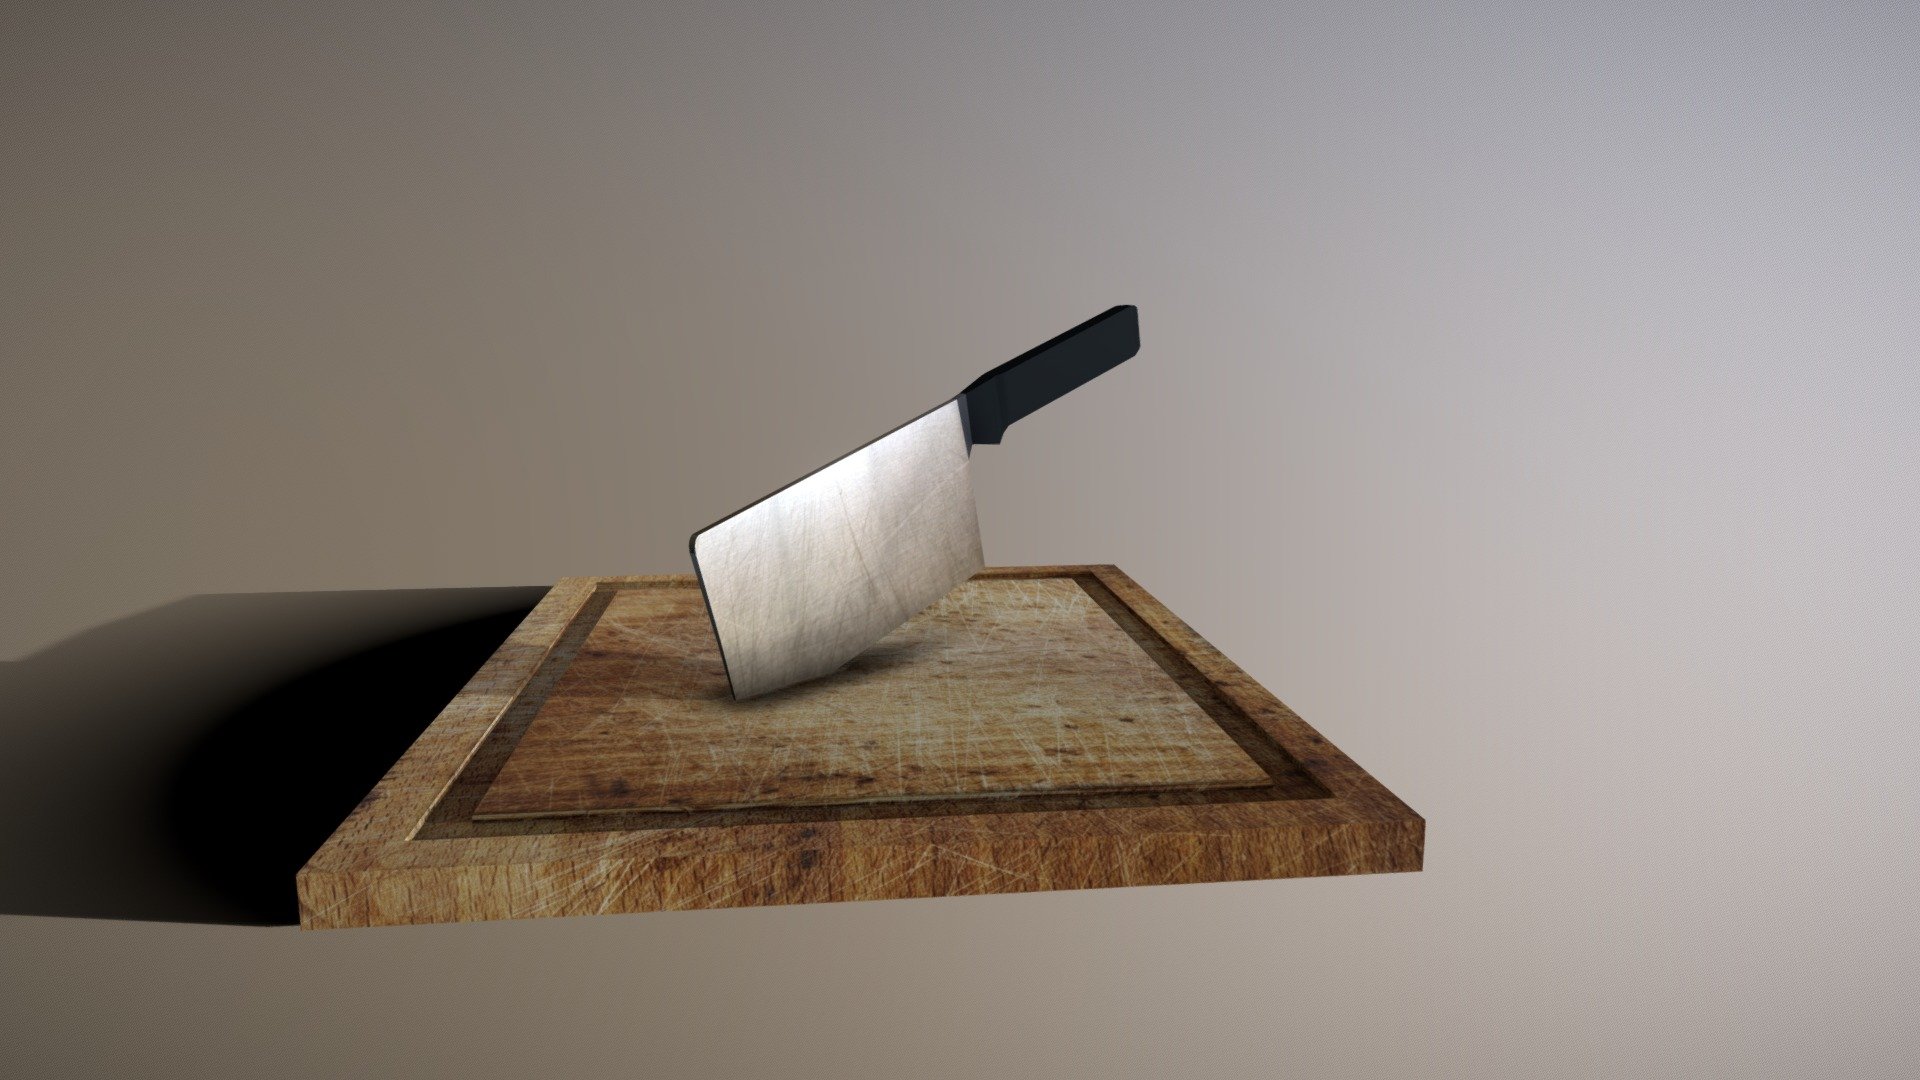 Knife and chopping board